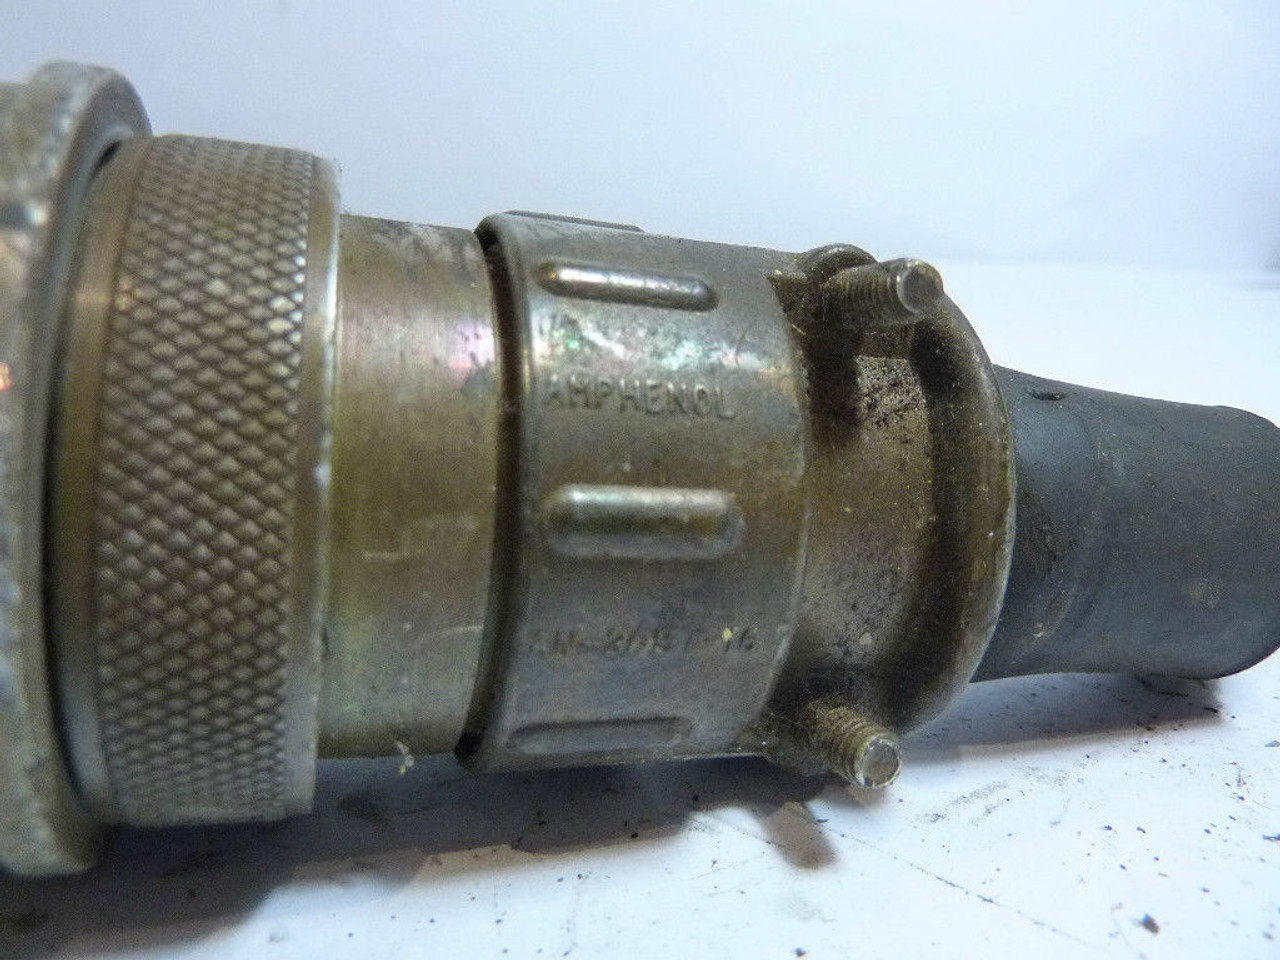 Amphenol AN-3057-16 Circular Connector Size 24-28 USED